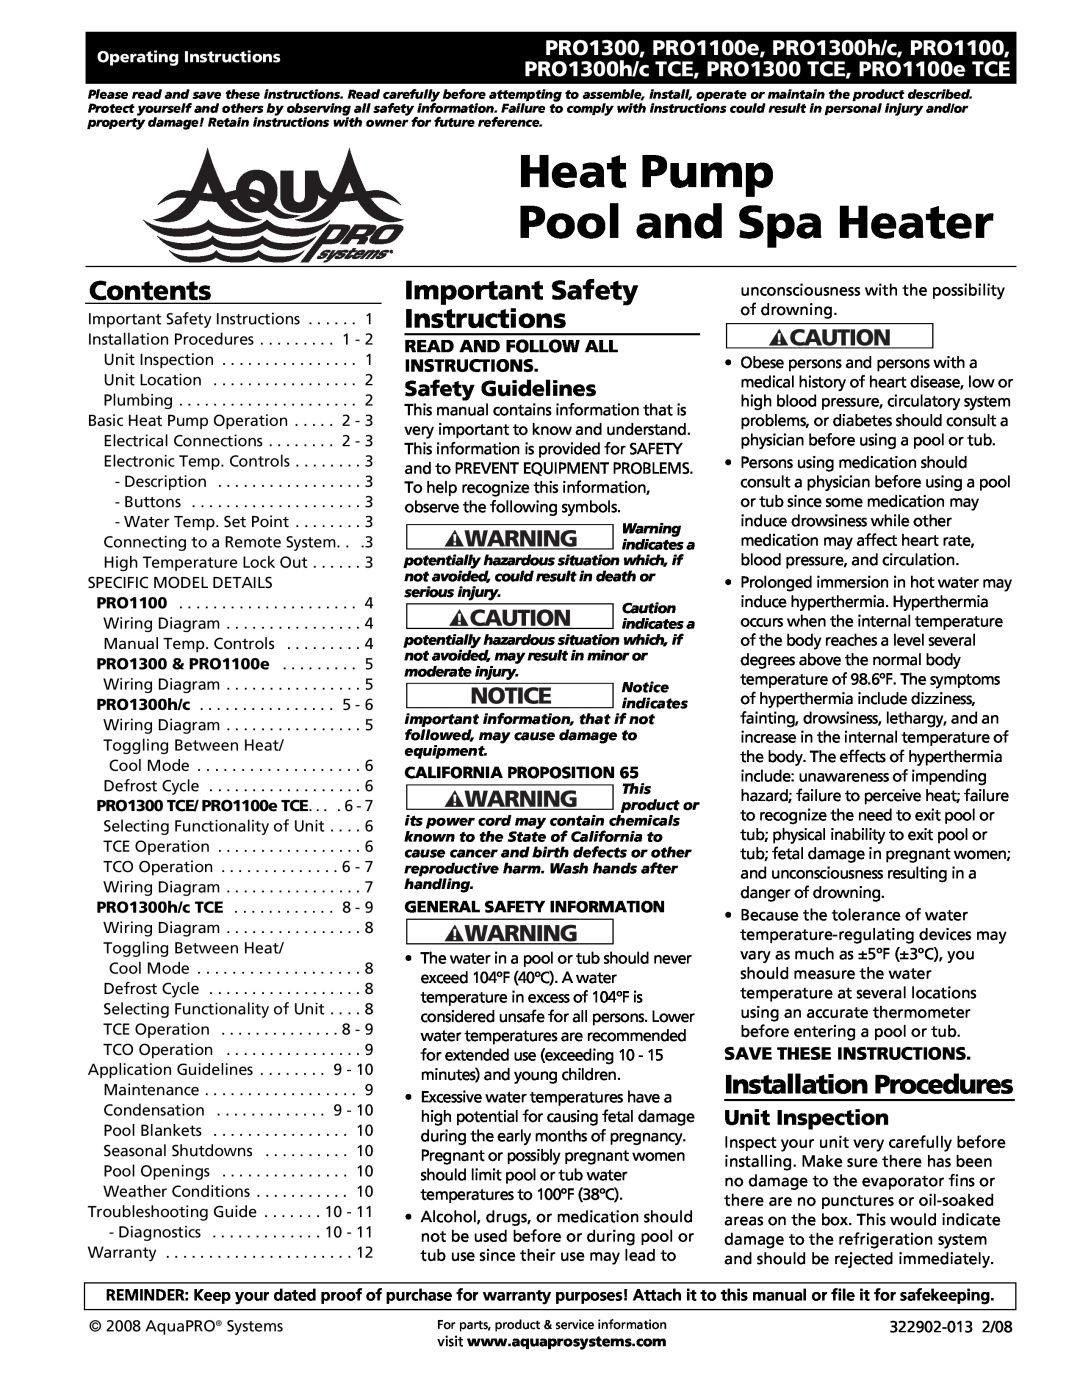 AquaPRO PRO1100, PRO1300 Heat Pump Pool and Spa Heater, Contents, Important Safety Instructions, Installation Procedures 